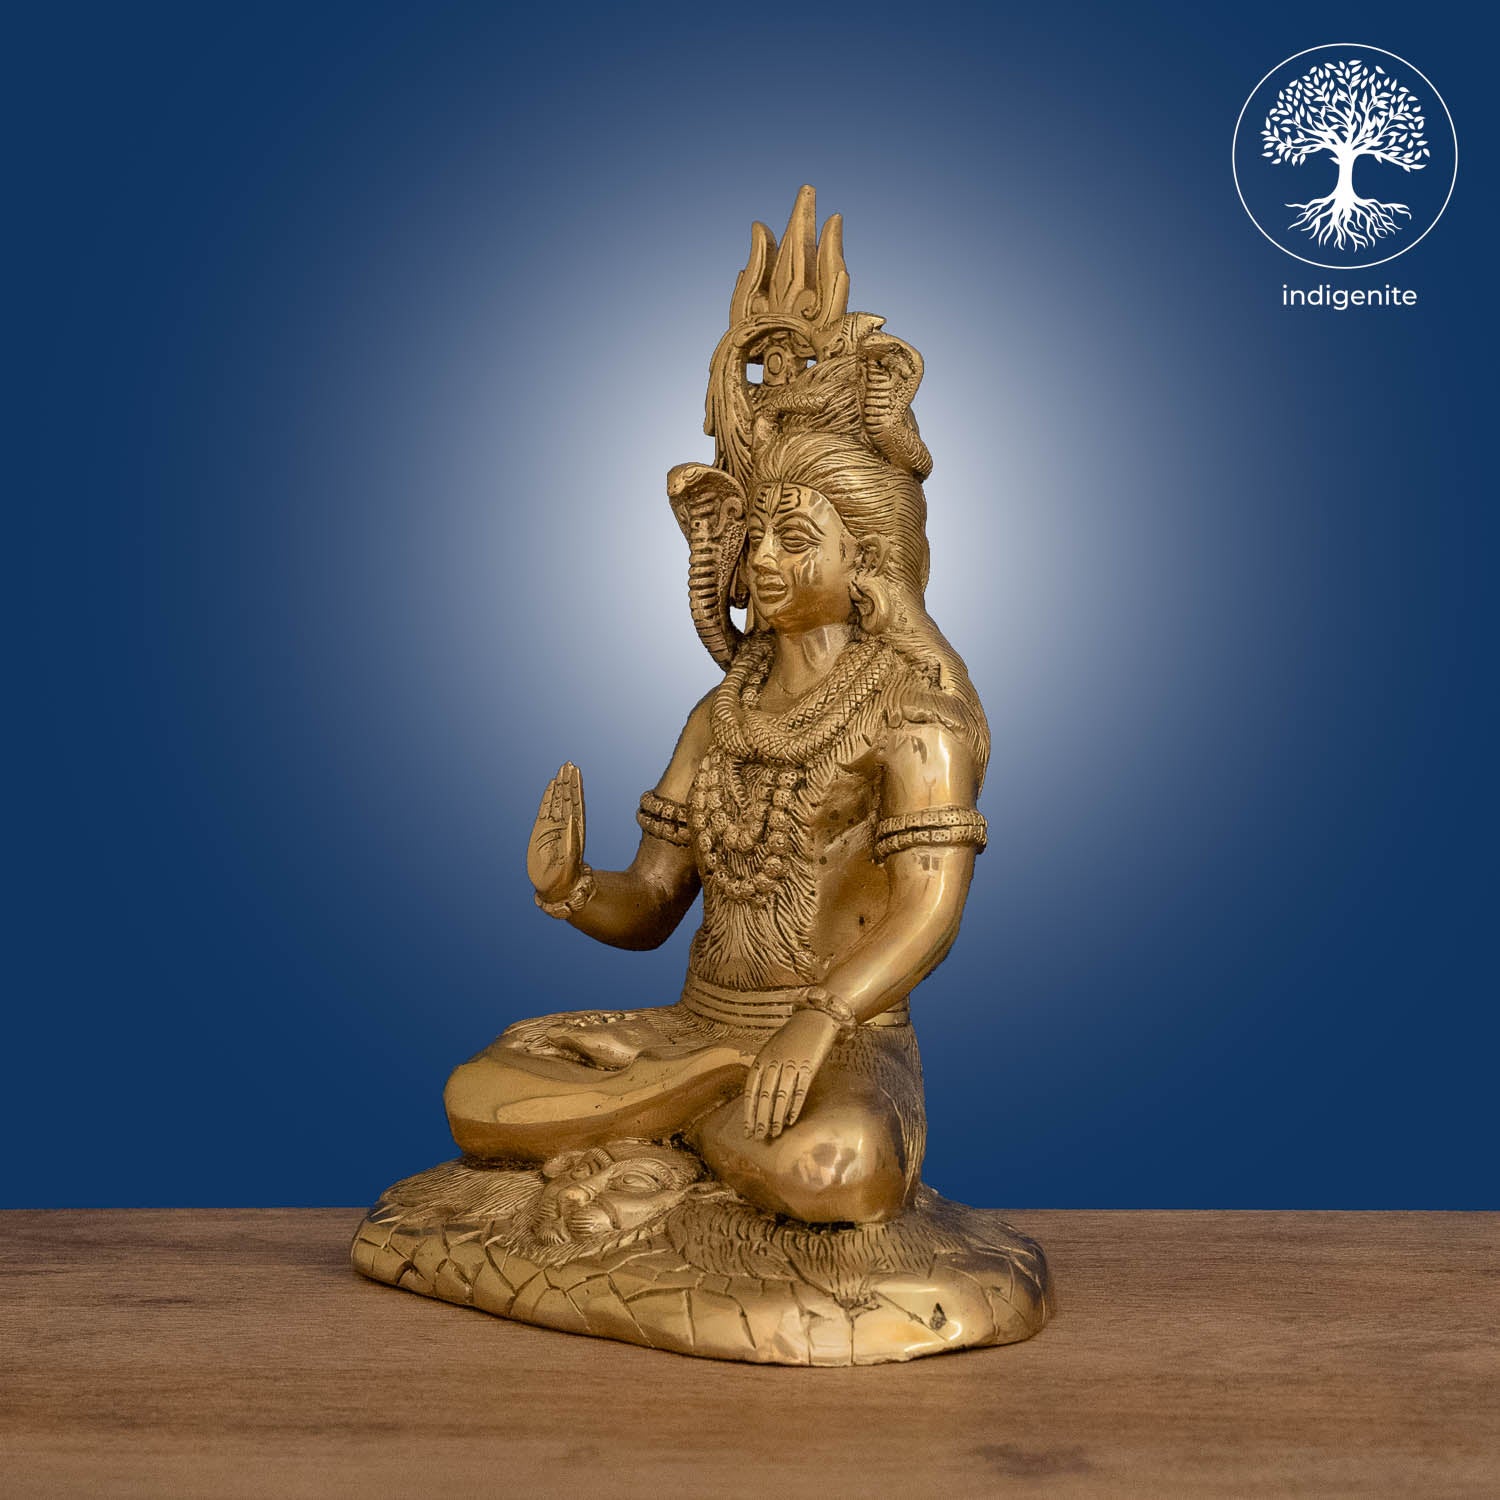 LORD SHIVA BRASS STATUE - Buy exclusive brass statues